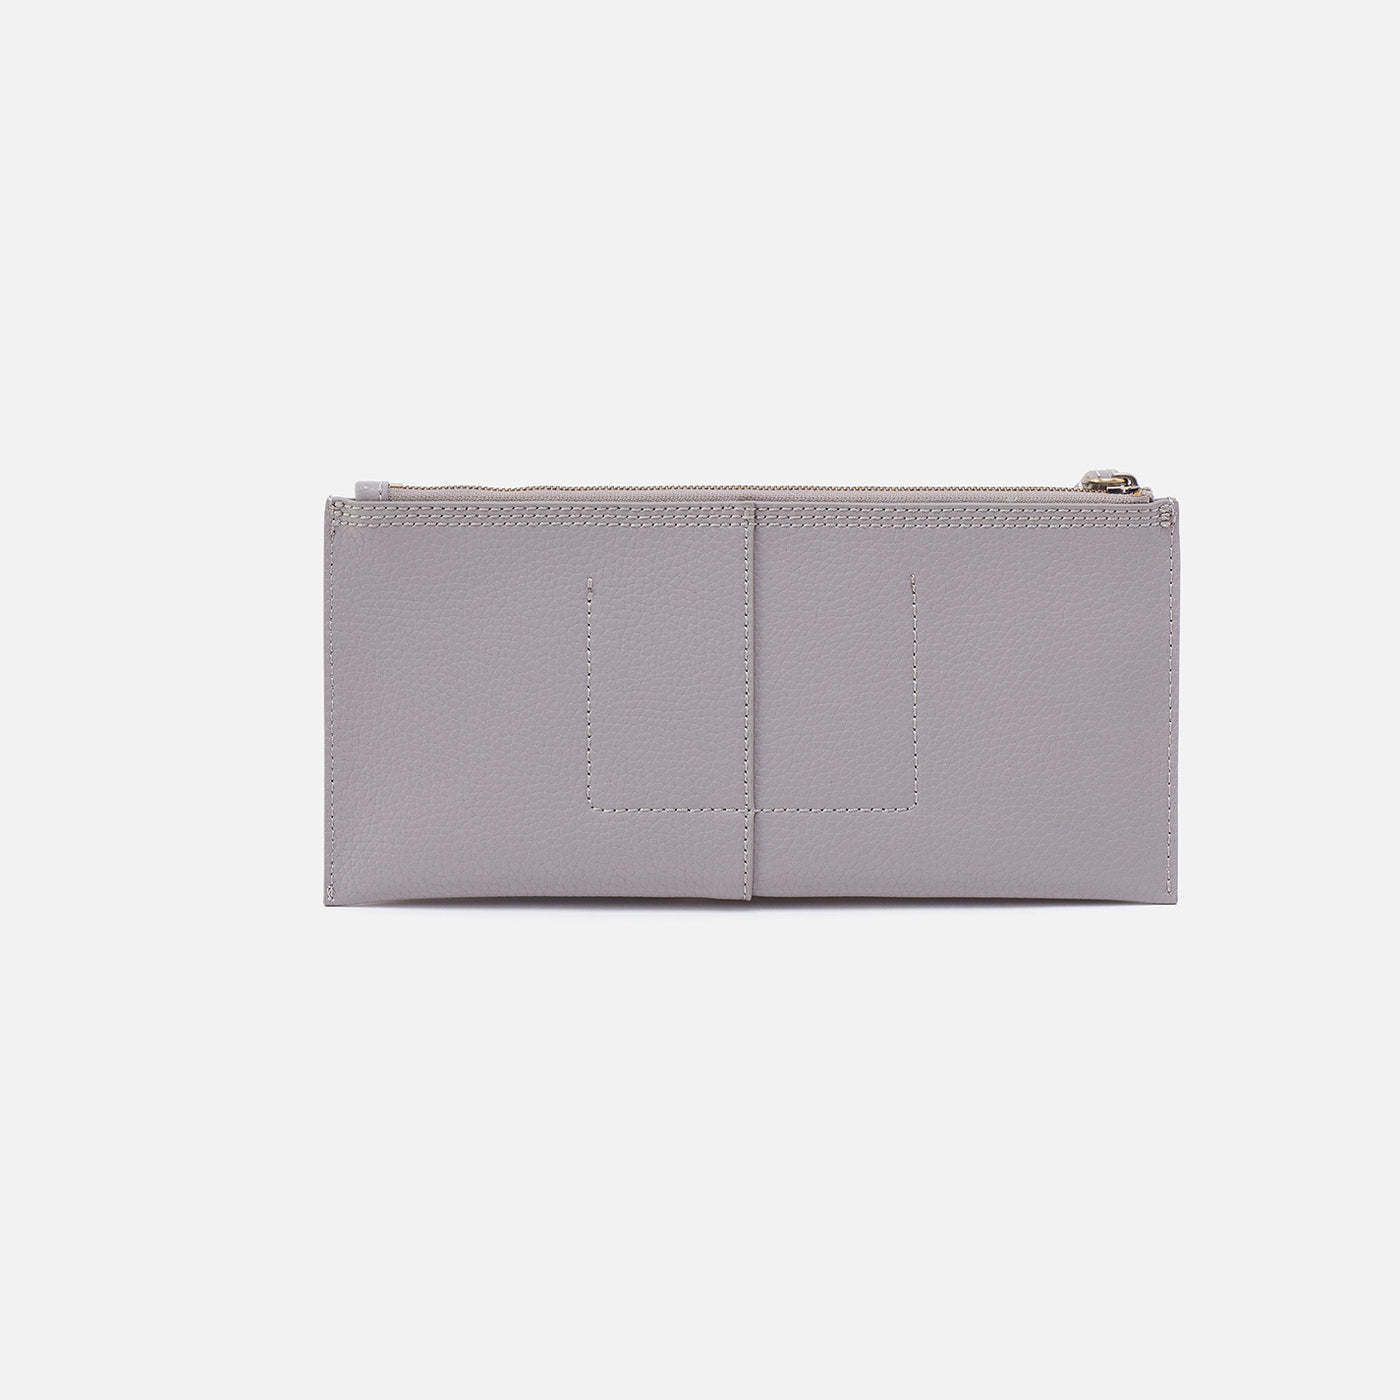 Vida Large Pouch in Micro Pebbled Leather - Morning Dove Grey